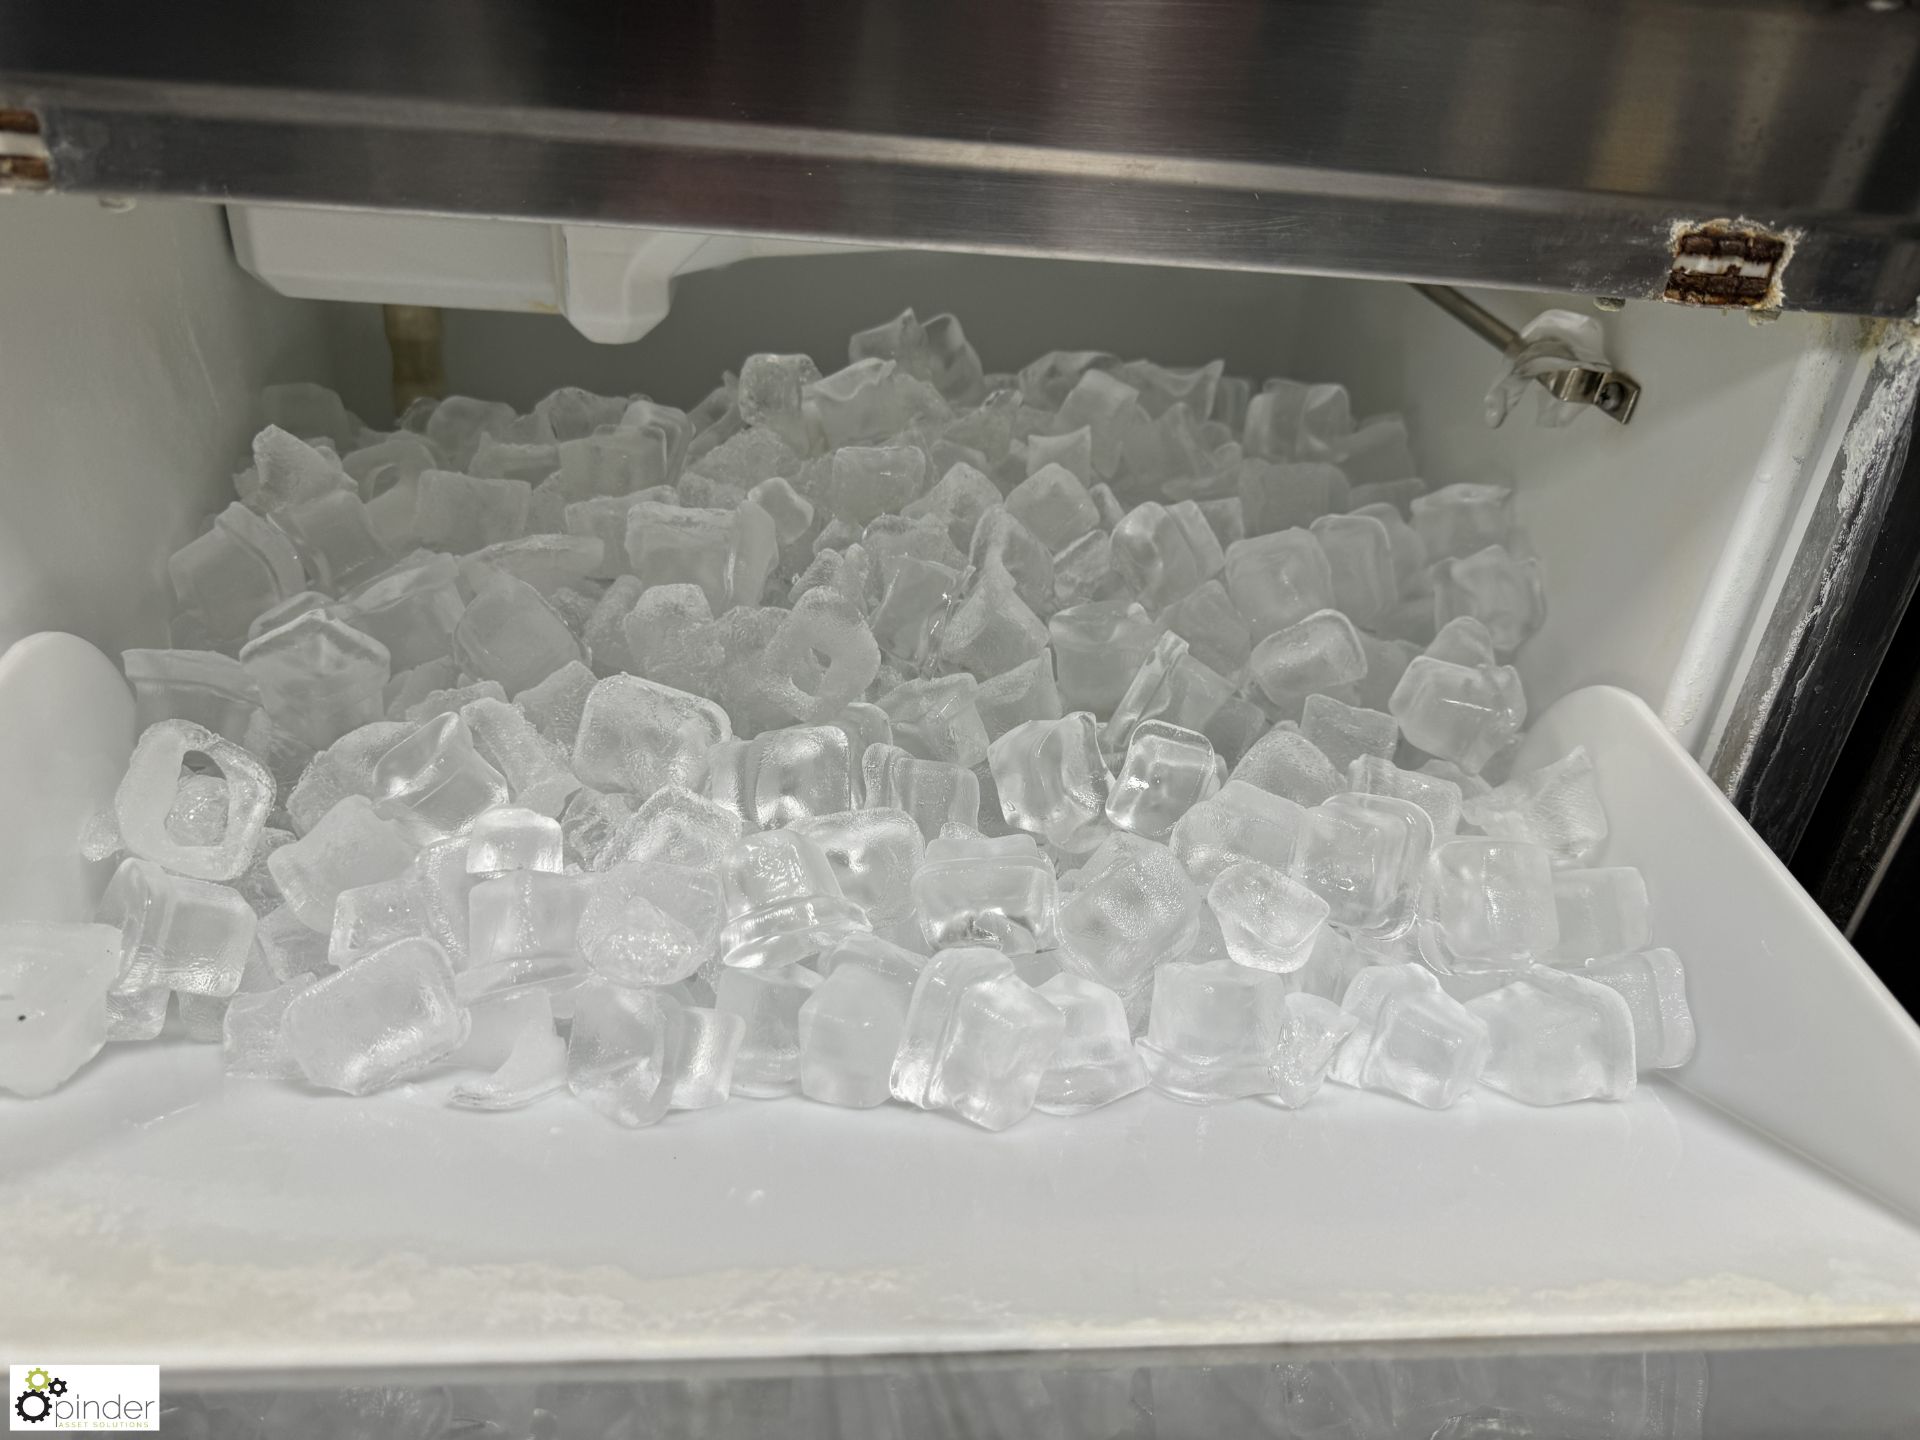 Foster stainless steel under counter Ice Machine, 240volts (location in building - level 7) - Image 2 of 3